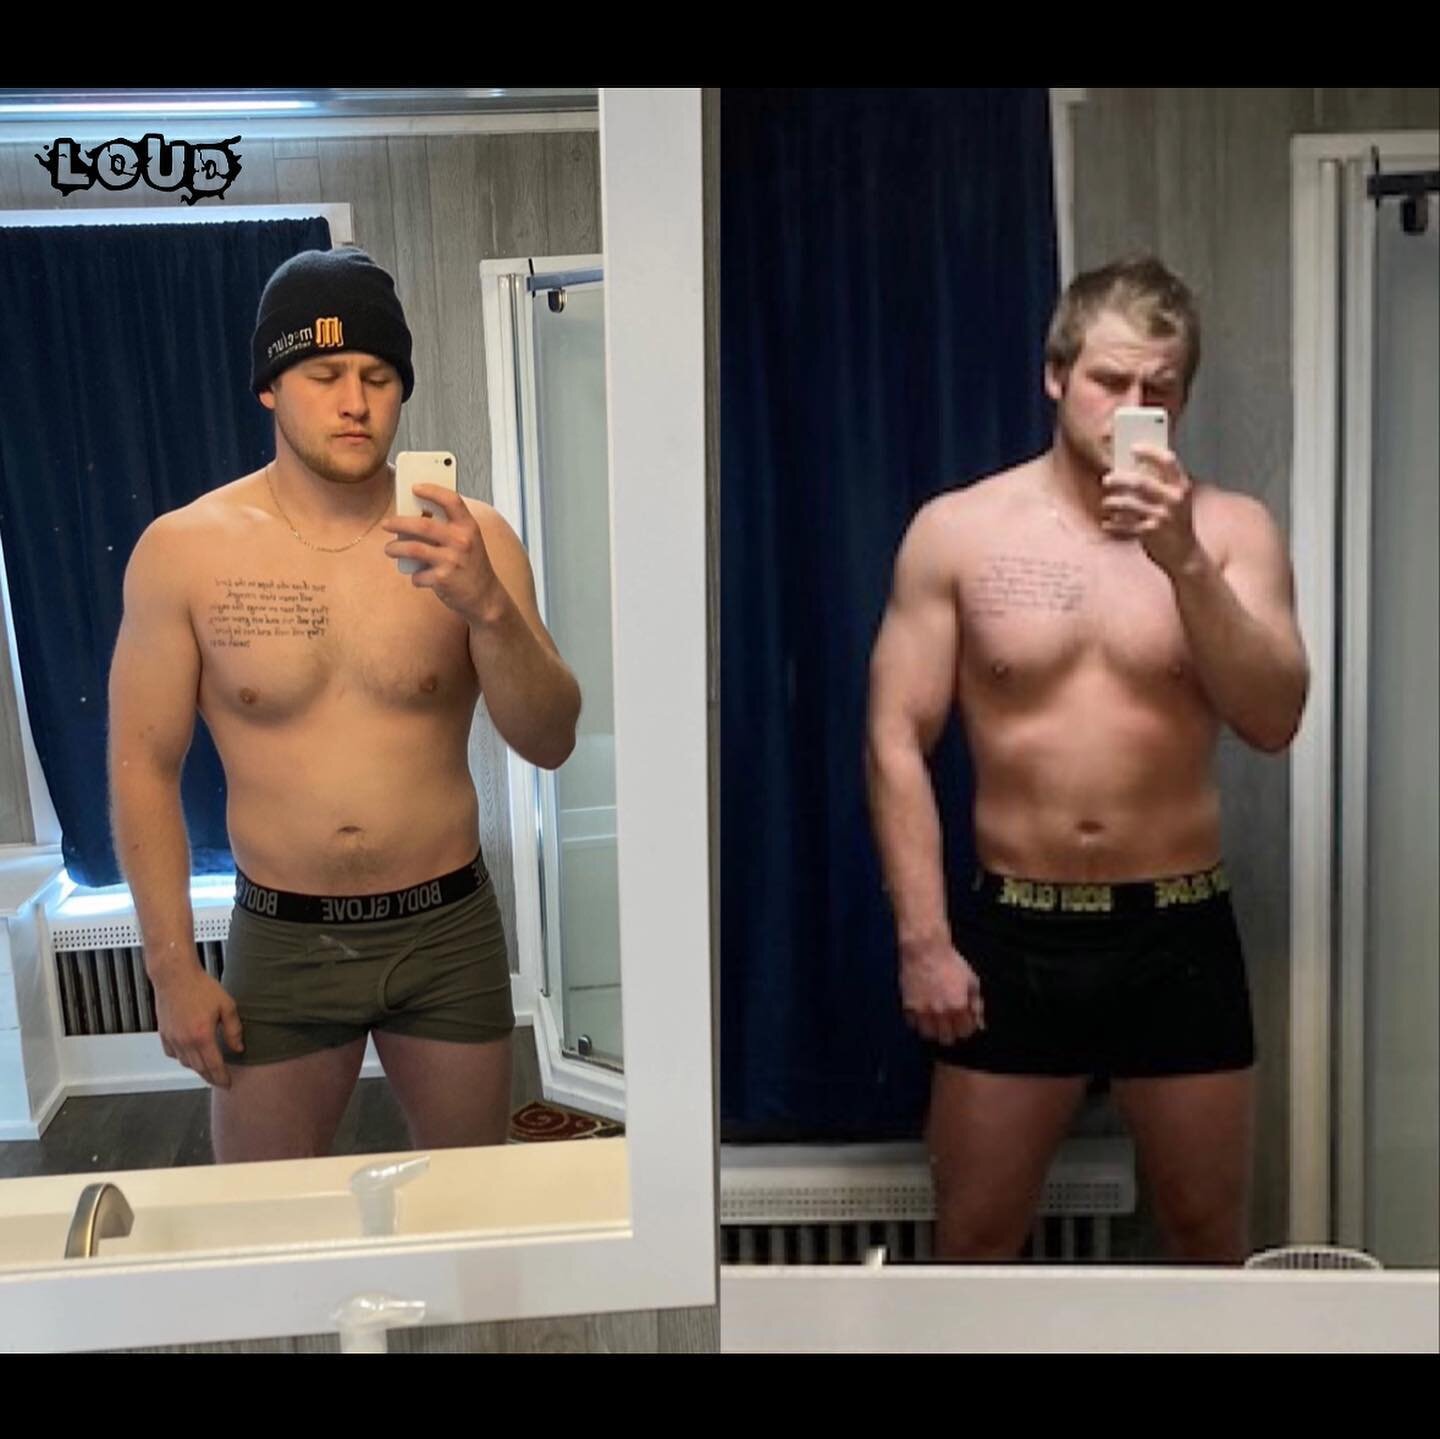 ‼️𝐋𝐞𝐬𝐬 𝐓𝐡𝐚𝐧 𝐚 𝟐 𝐌𝐨𝐧𝐭𝐡 𝐃𝐢𝐟𝐟𝐞𝐫𝐞𝐧𝐜𝐞‼️⁣
⁣
Shoutout to a long-time friend of mine and client @croman33 for his progress he&rsquo;s made in such short little time.⁣
⁣
With plenty of time to go yet, Hunter has demonstrated his dilig